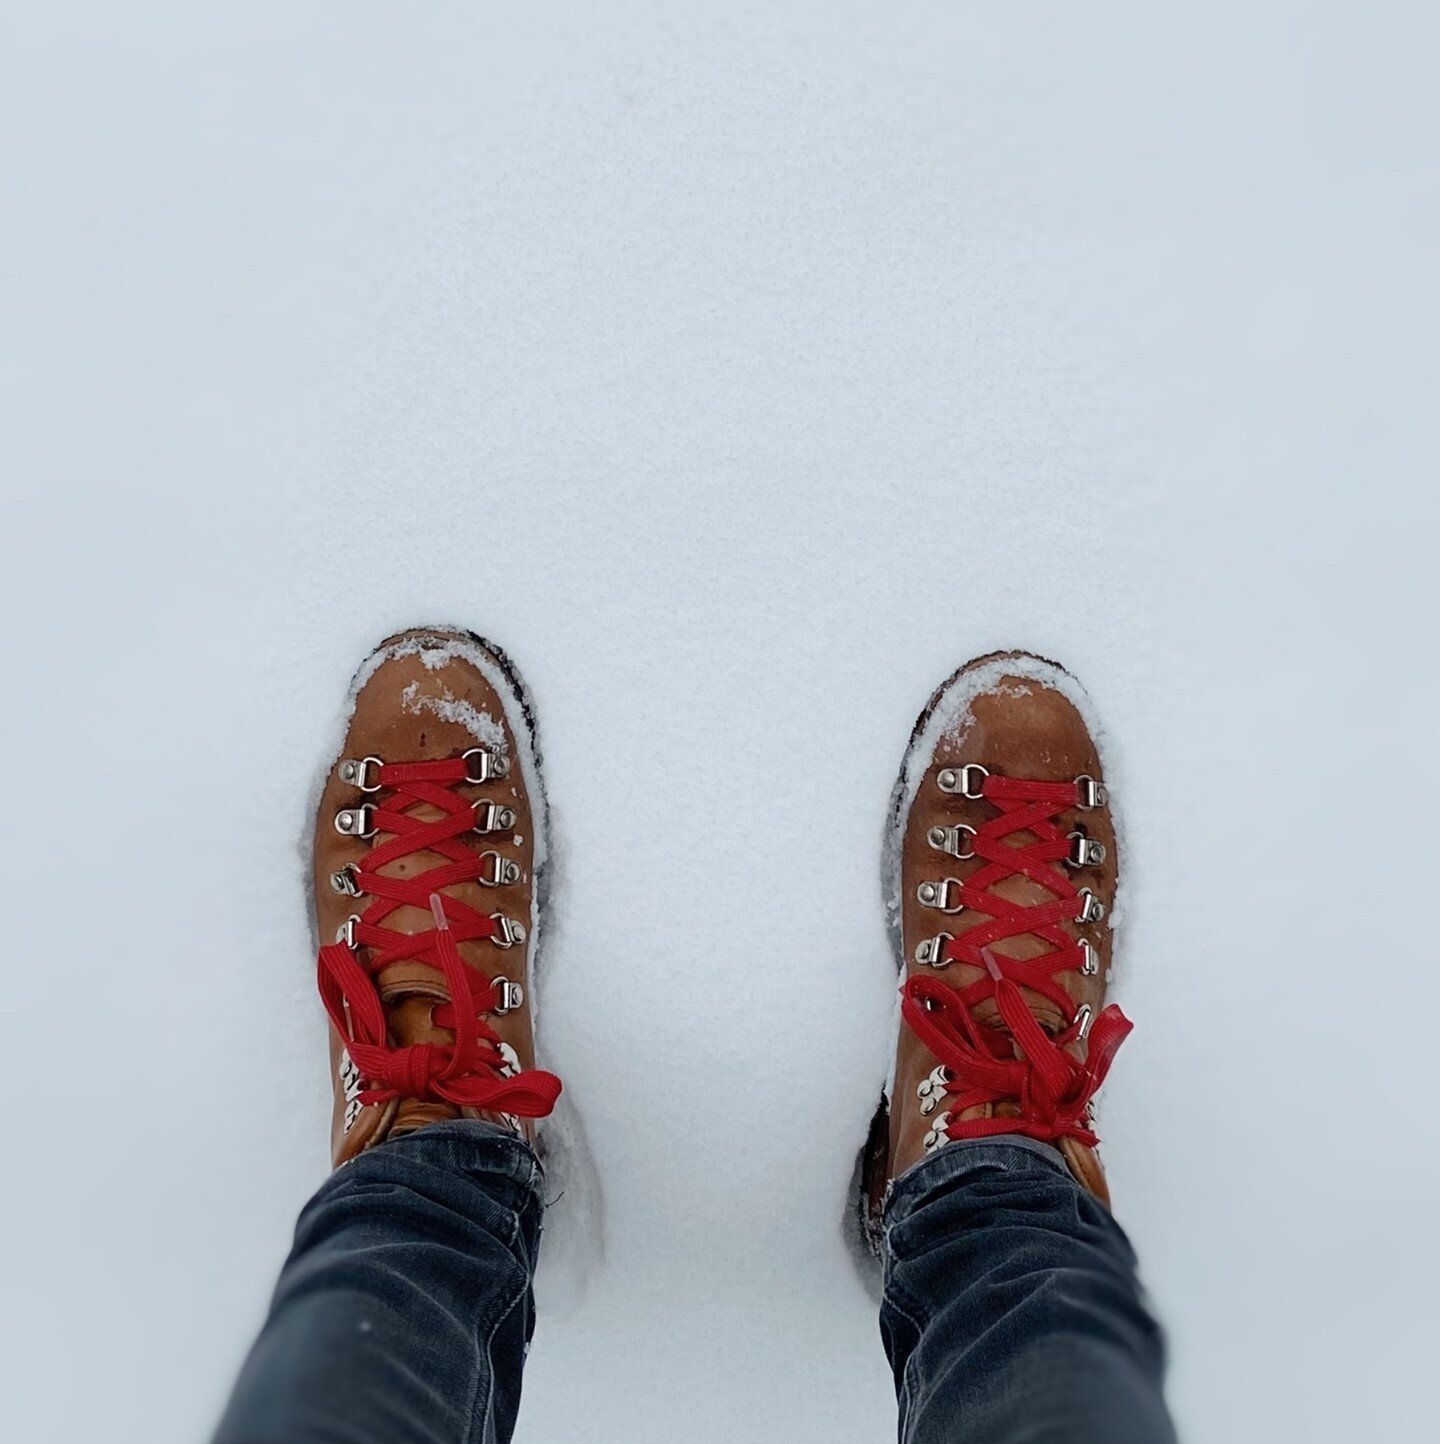 About to destroy this pristine white snow with these sturdy boots.⁠ #sorrynotsorry⁠
⁠
⁠
⁠
#dannerboots #dannermountainlight ⁠#latergram #winter #letitsnow #winterwonderland #snowday #greatoutdoors #exploremore #wanderlust #optoutside #exploretocreate